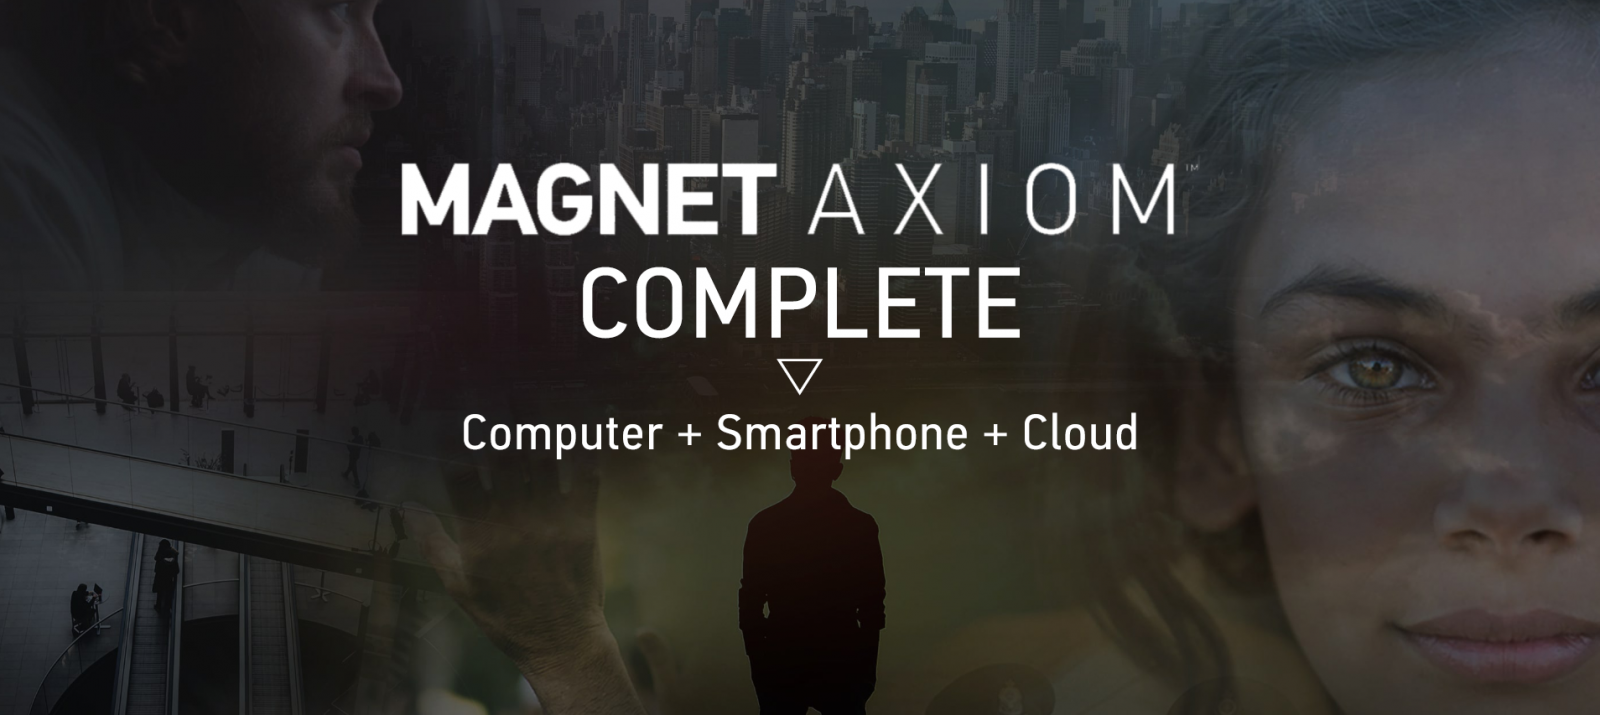 Magnet AXIOM Complete